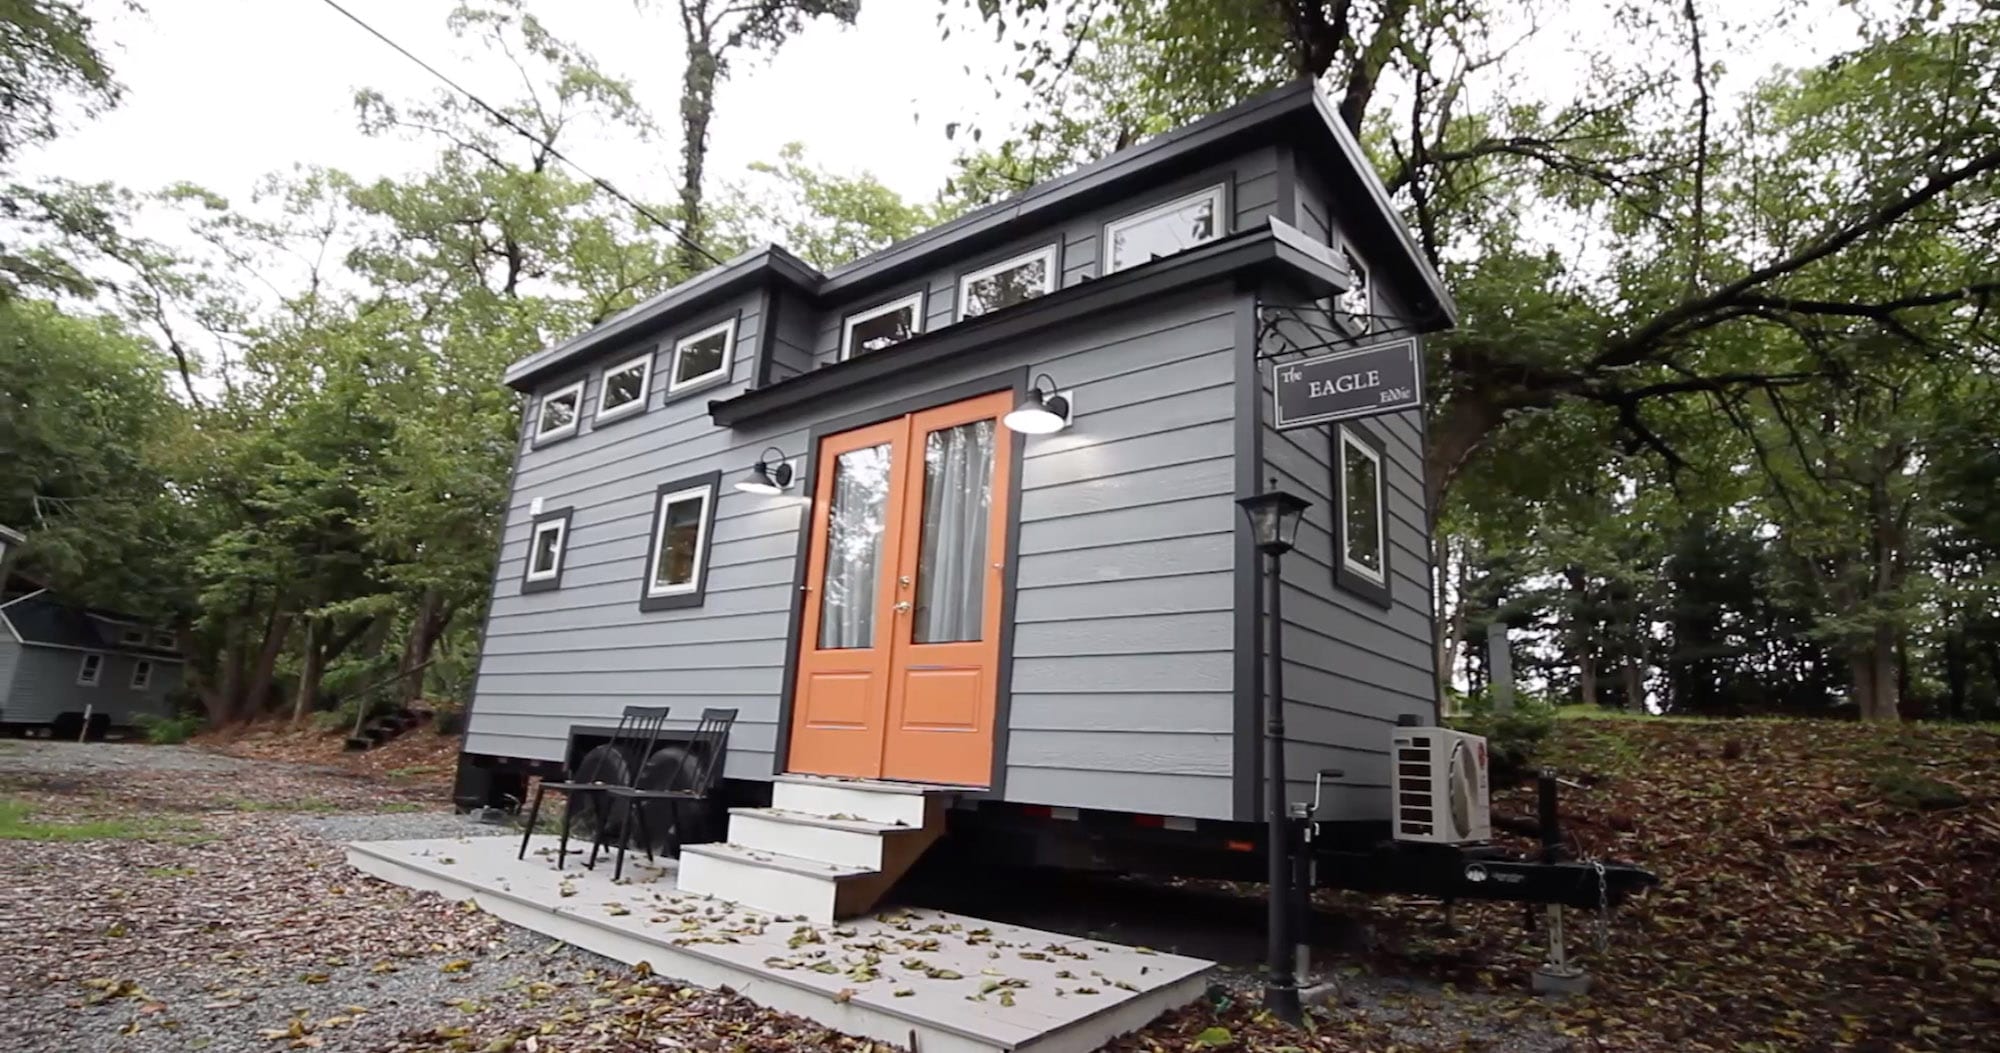 Turned Tiny - The Business of Tiny Homes - Documentary Review